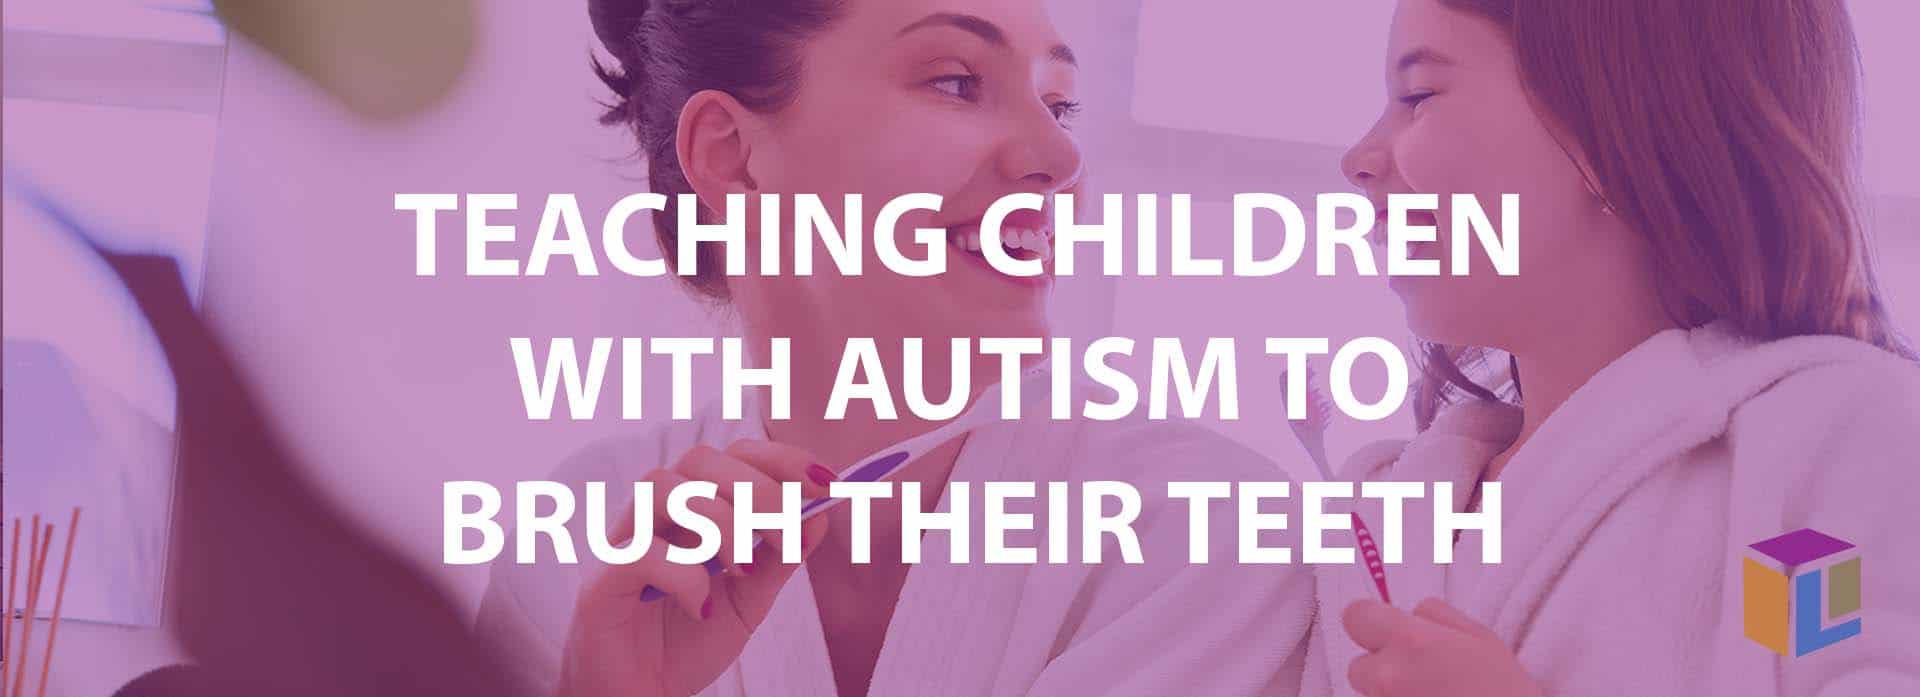 Teaching Children With Autism To Brush Their Teeth